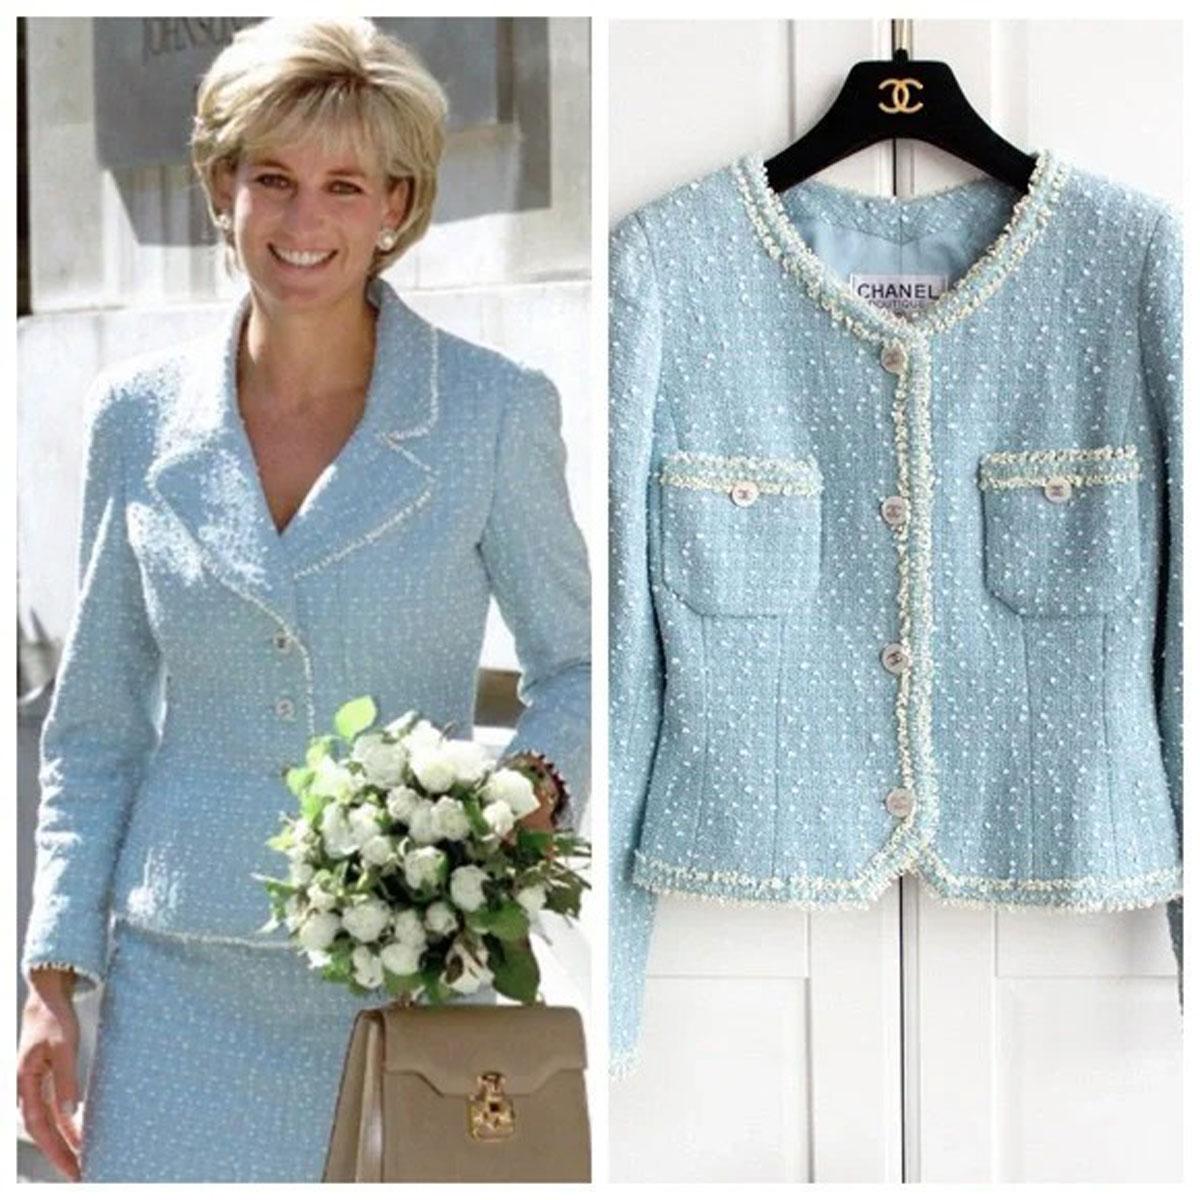 Chanel 1997 Vintage Baby Blue Tweed Jacket Museum Piece Seen on Princess Diana  For Sale